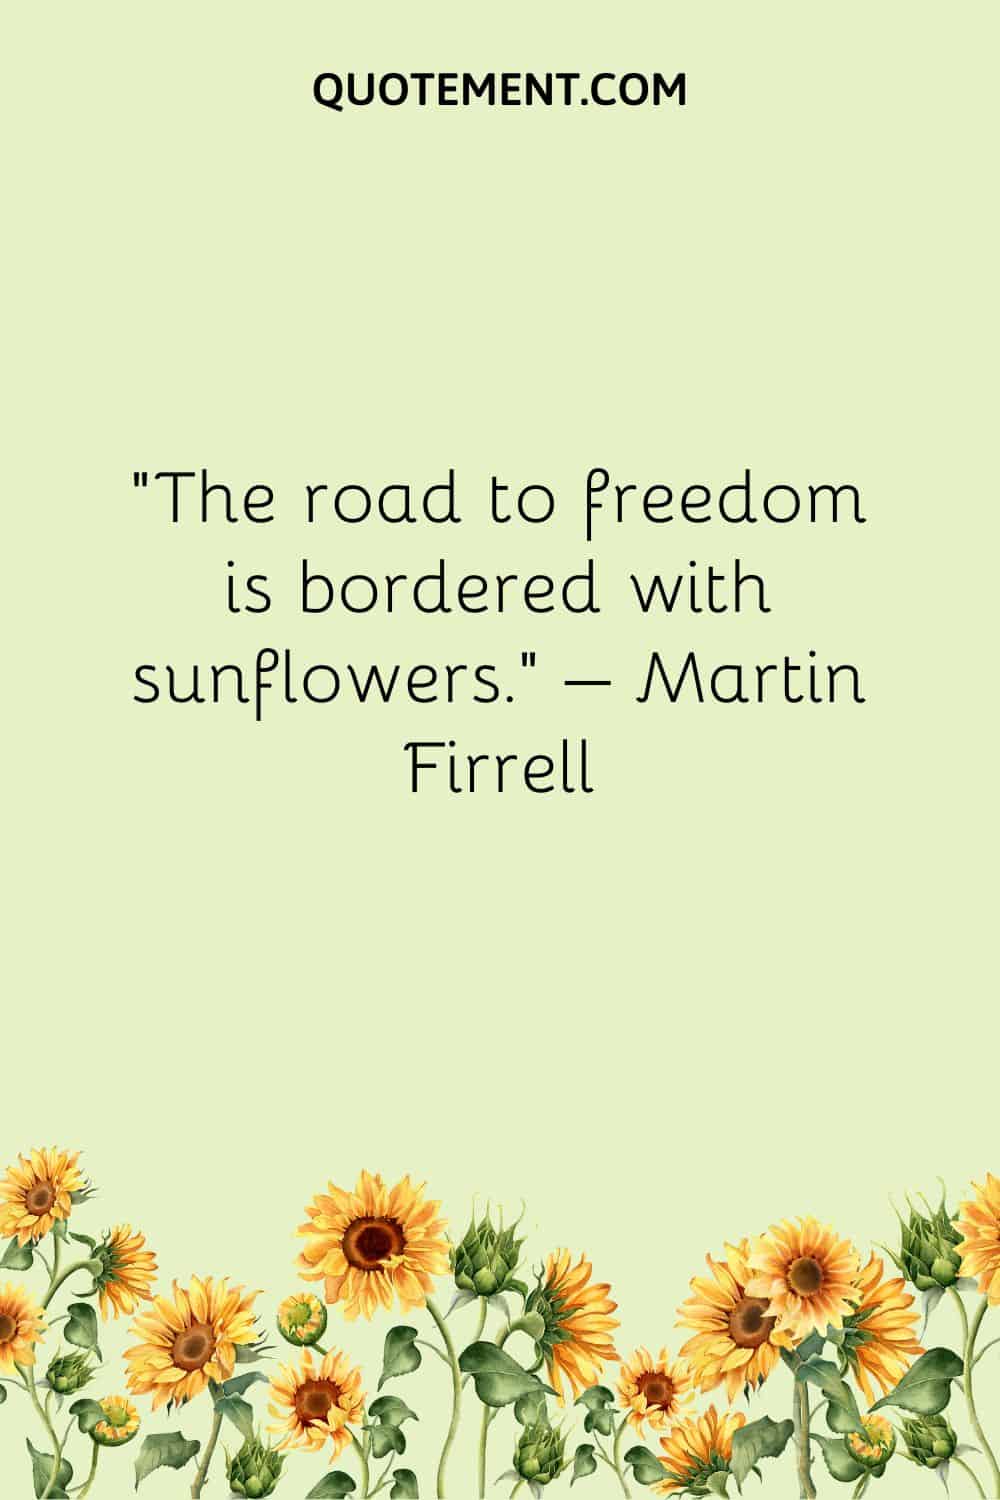 The road to freedom is bordered with sunflowers.